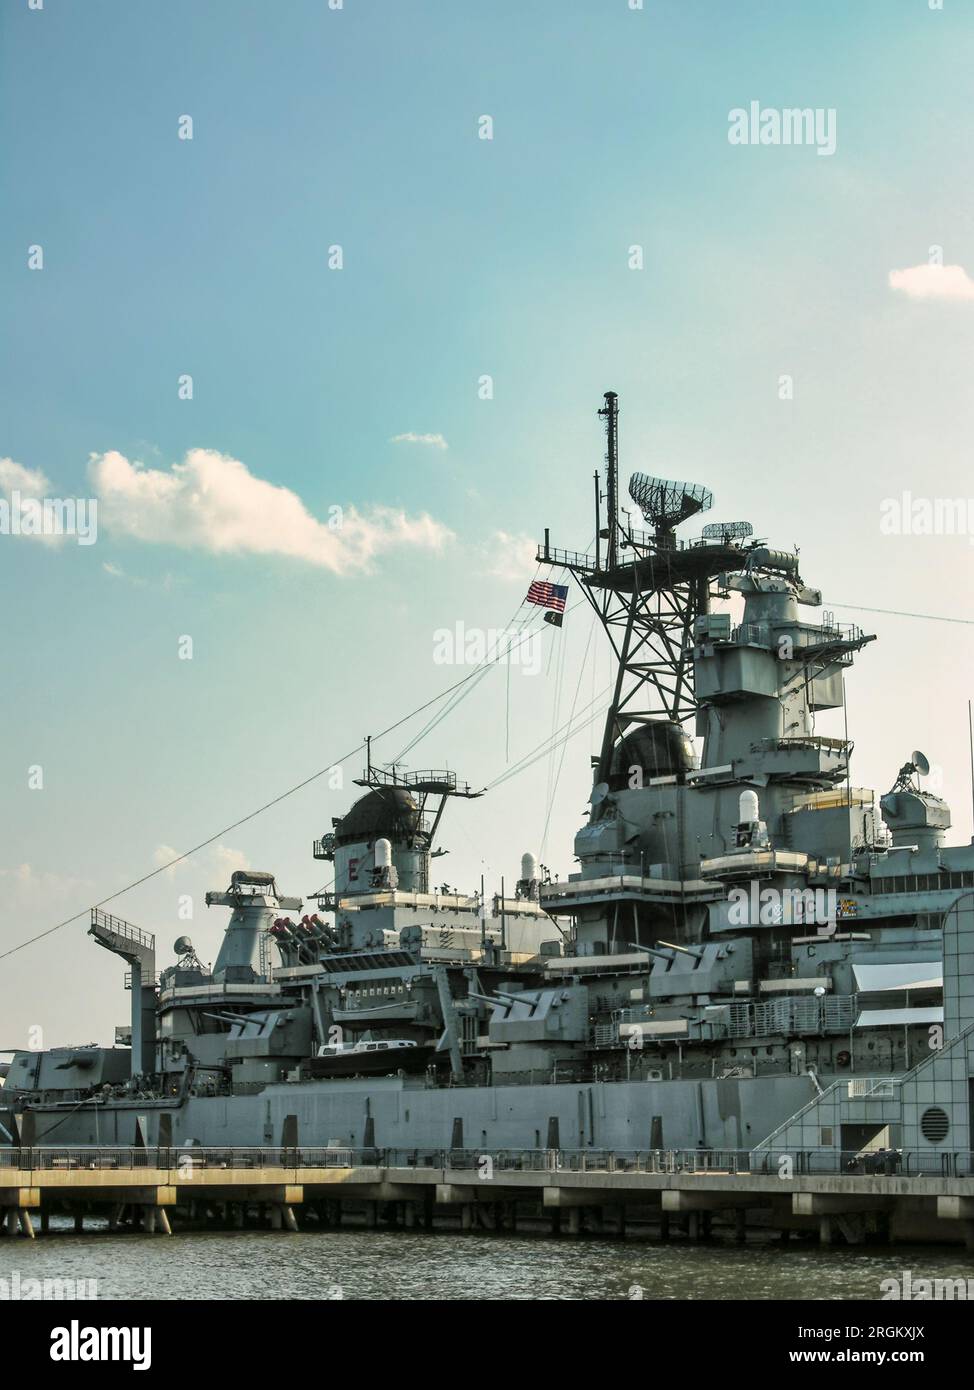 A large US battleship docked in the water in Camden, New Jersey Stock Photo